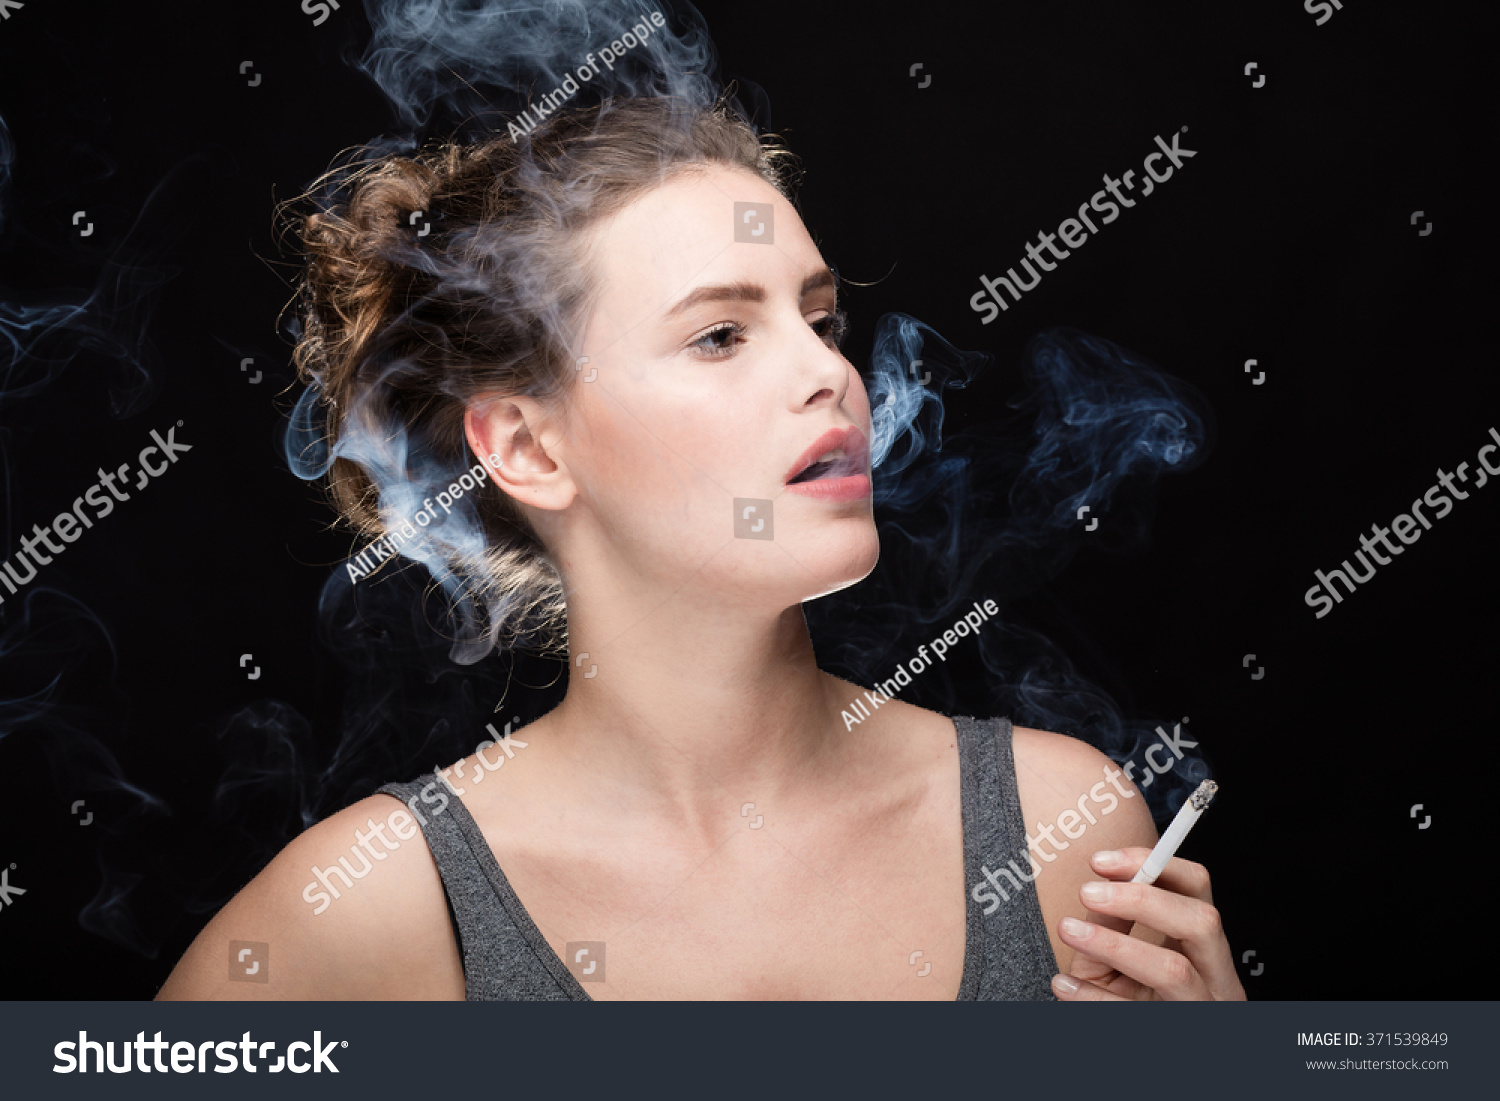 Wife smoking and blowing